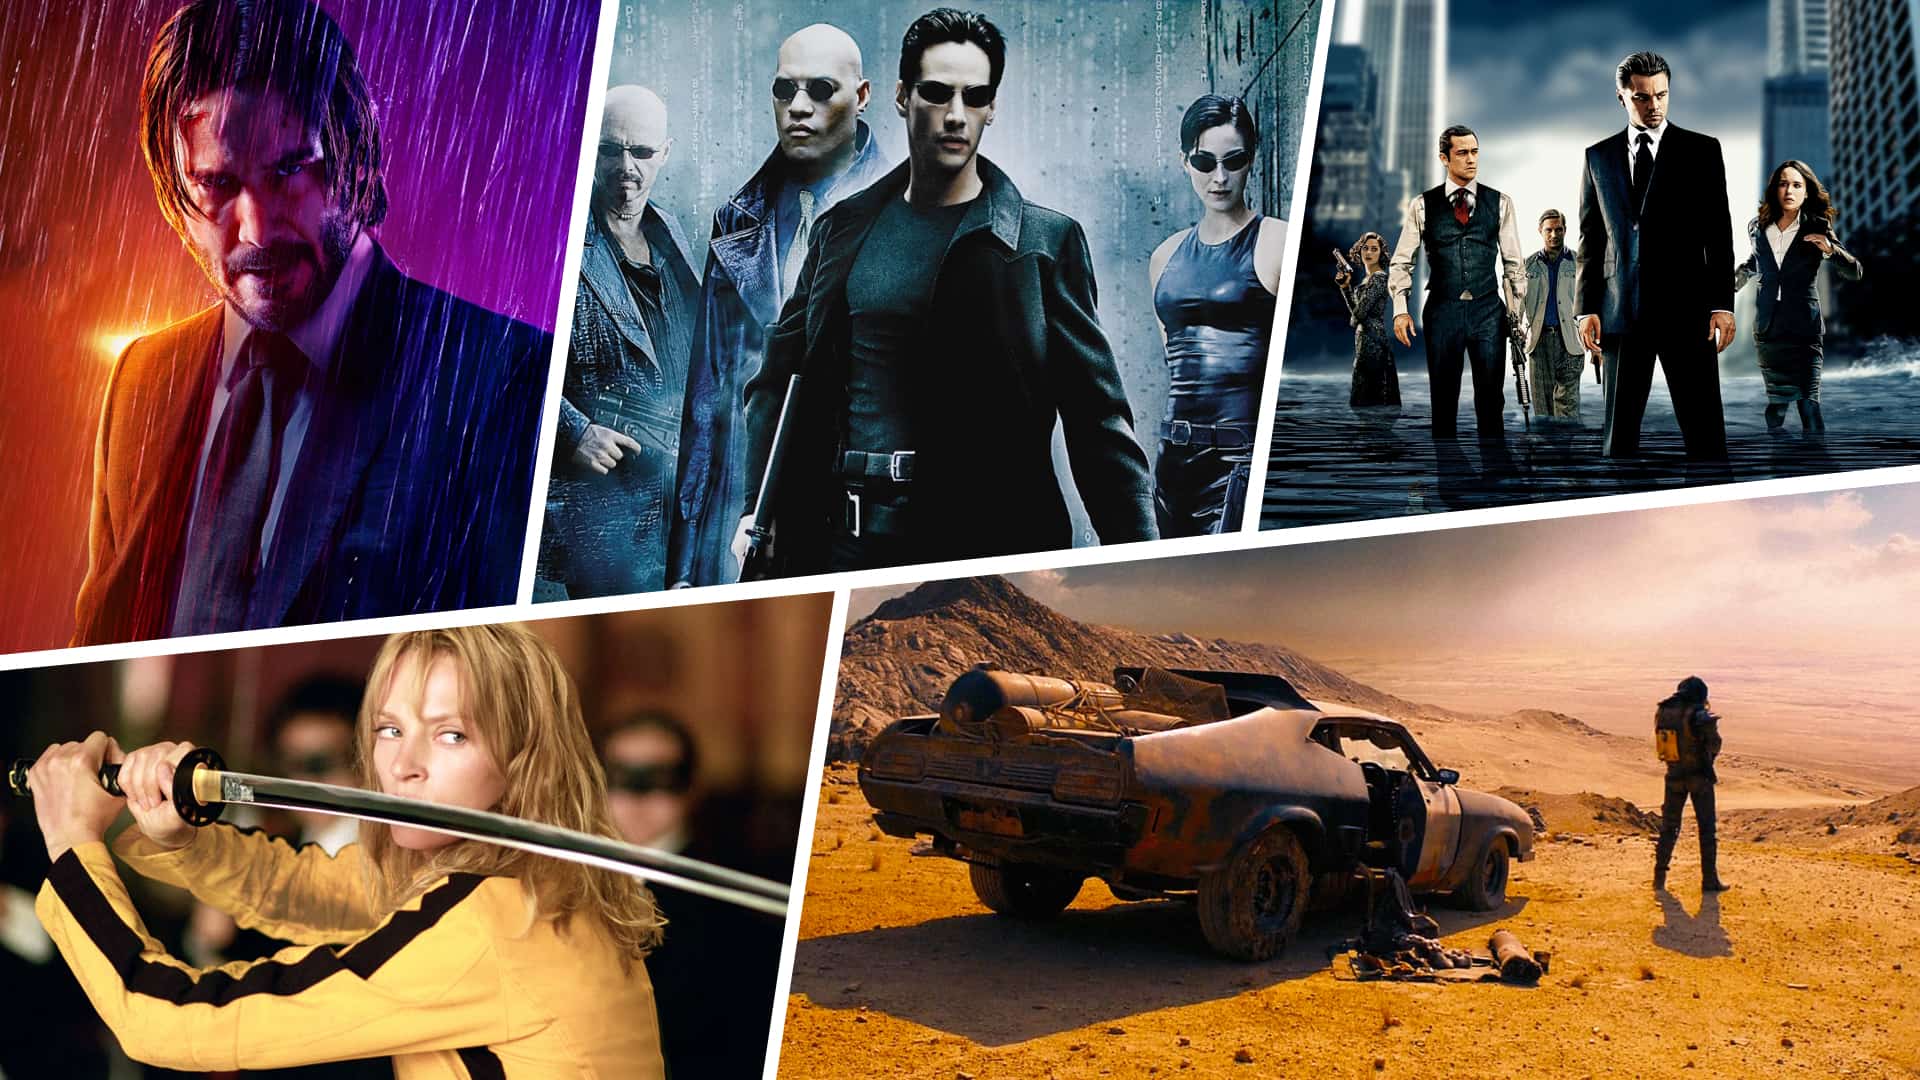 Best Action Movies of All Time - Featured